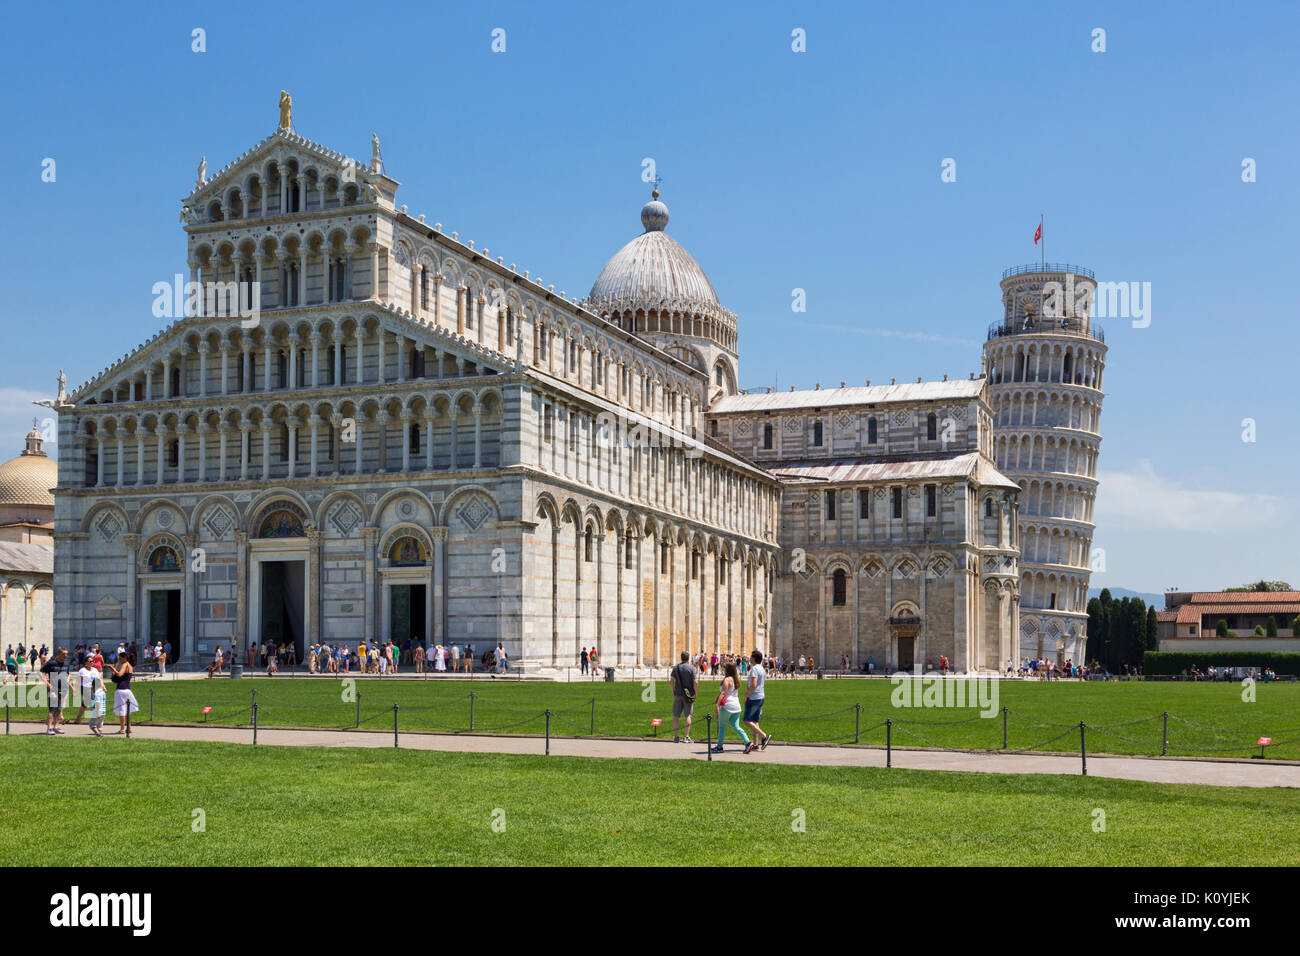 Pisa, Pisa Province, Tuscany, Italy.  Campo dei Miracoli, or Field of Miracles.  Also known as the Piazza del Duomo.  The cathedral, or Duomo, and its Stock Photo